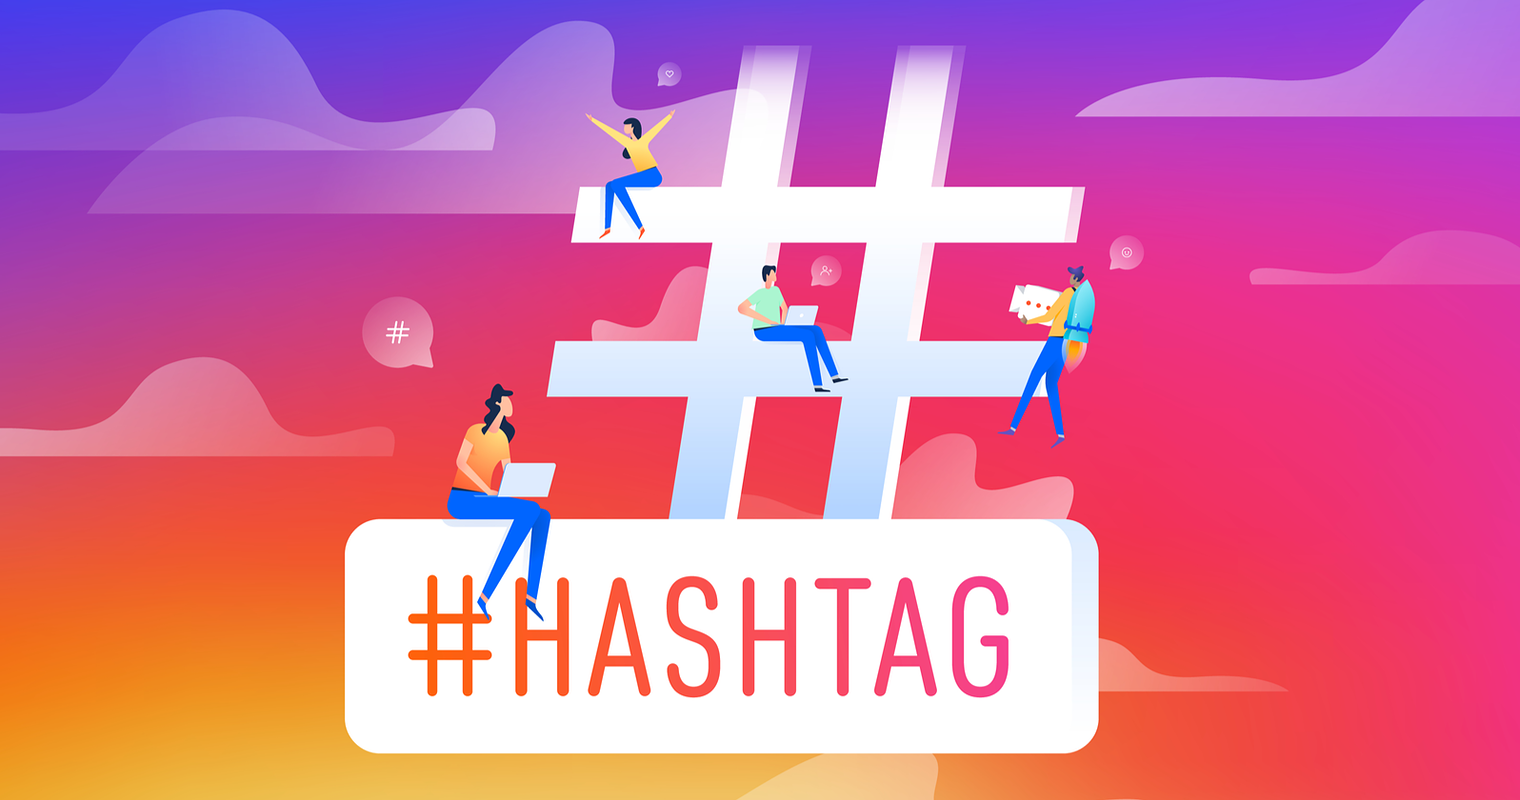 Use Relevant Hashtags